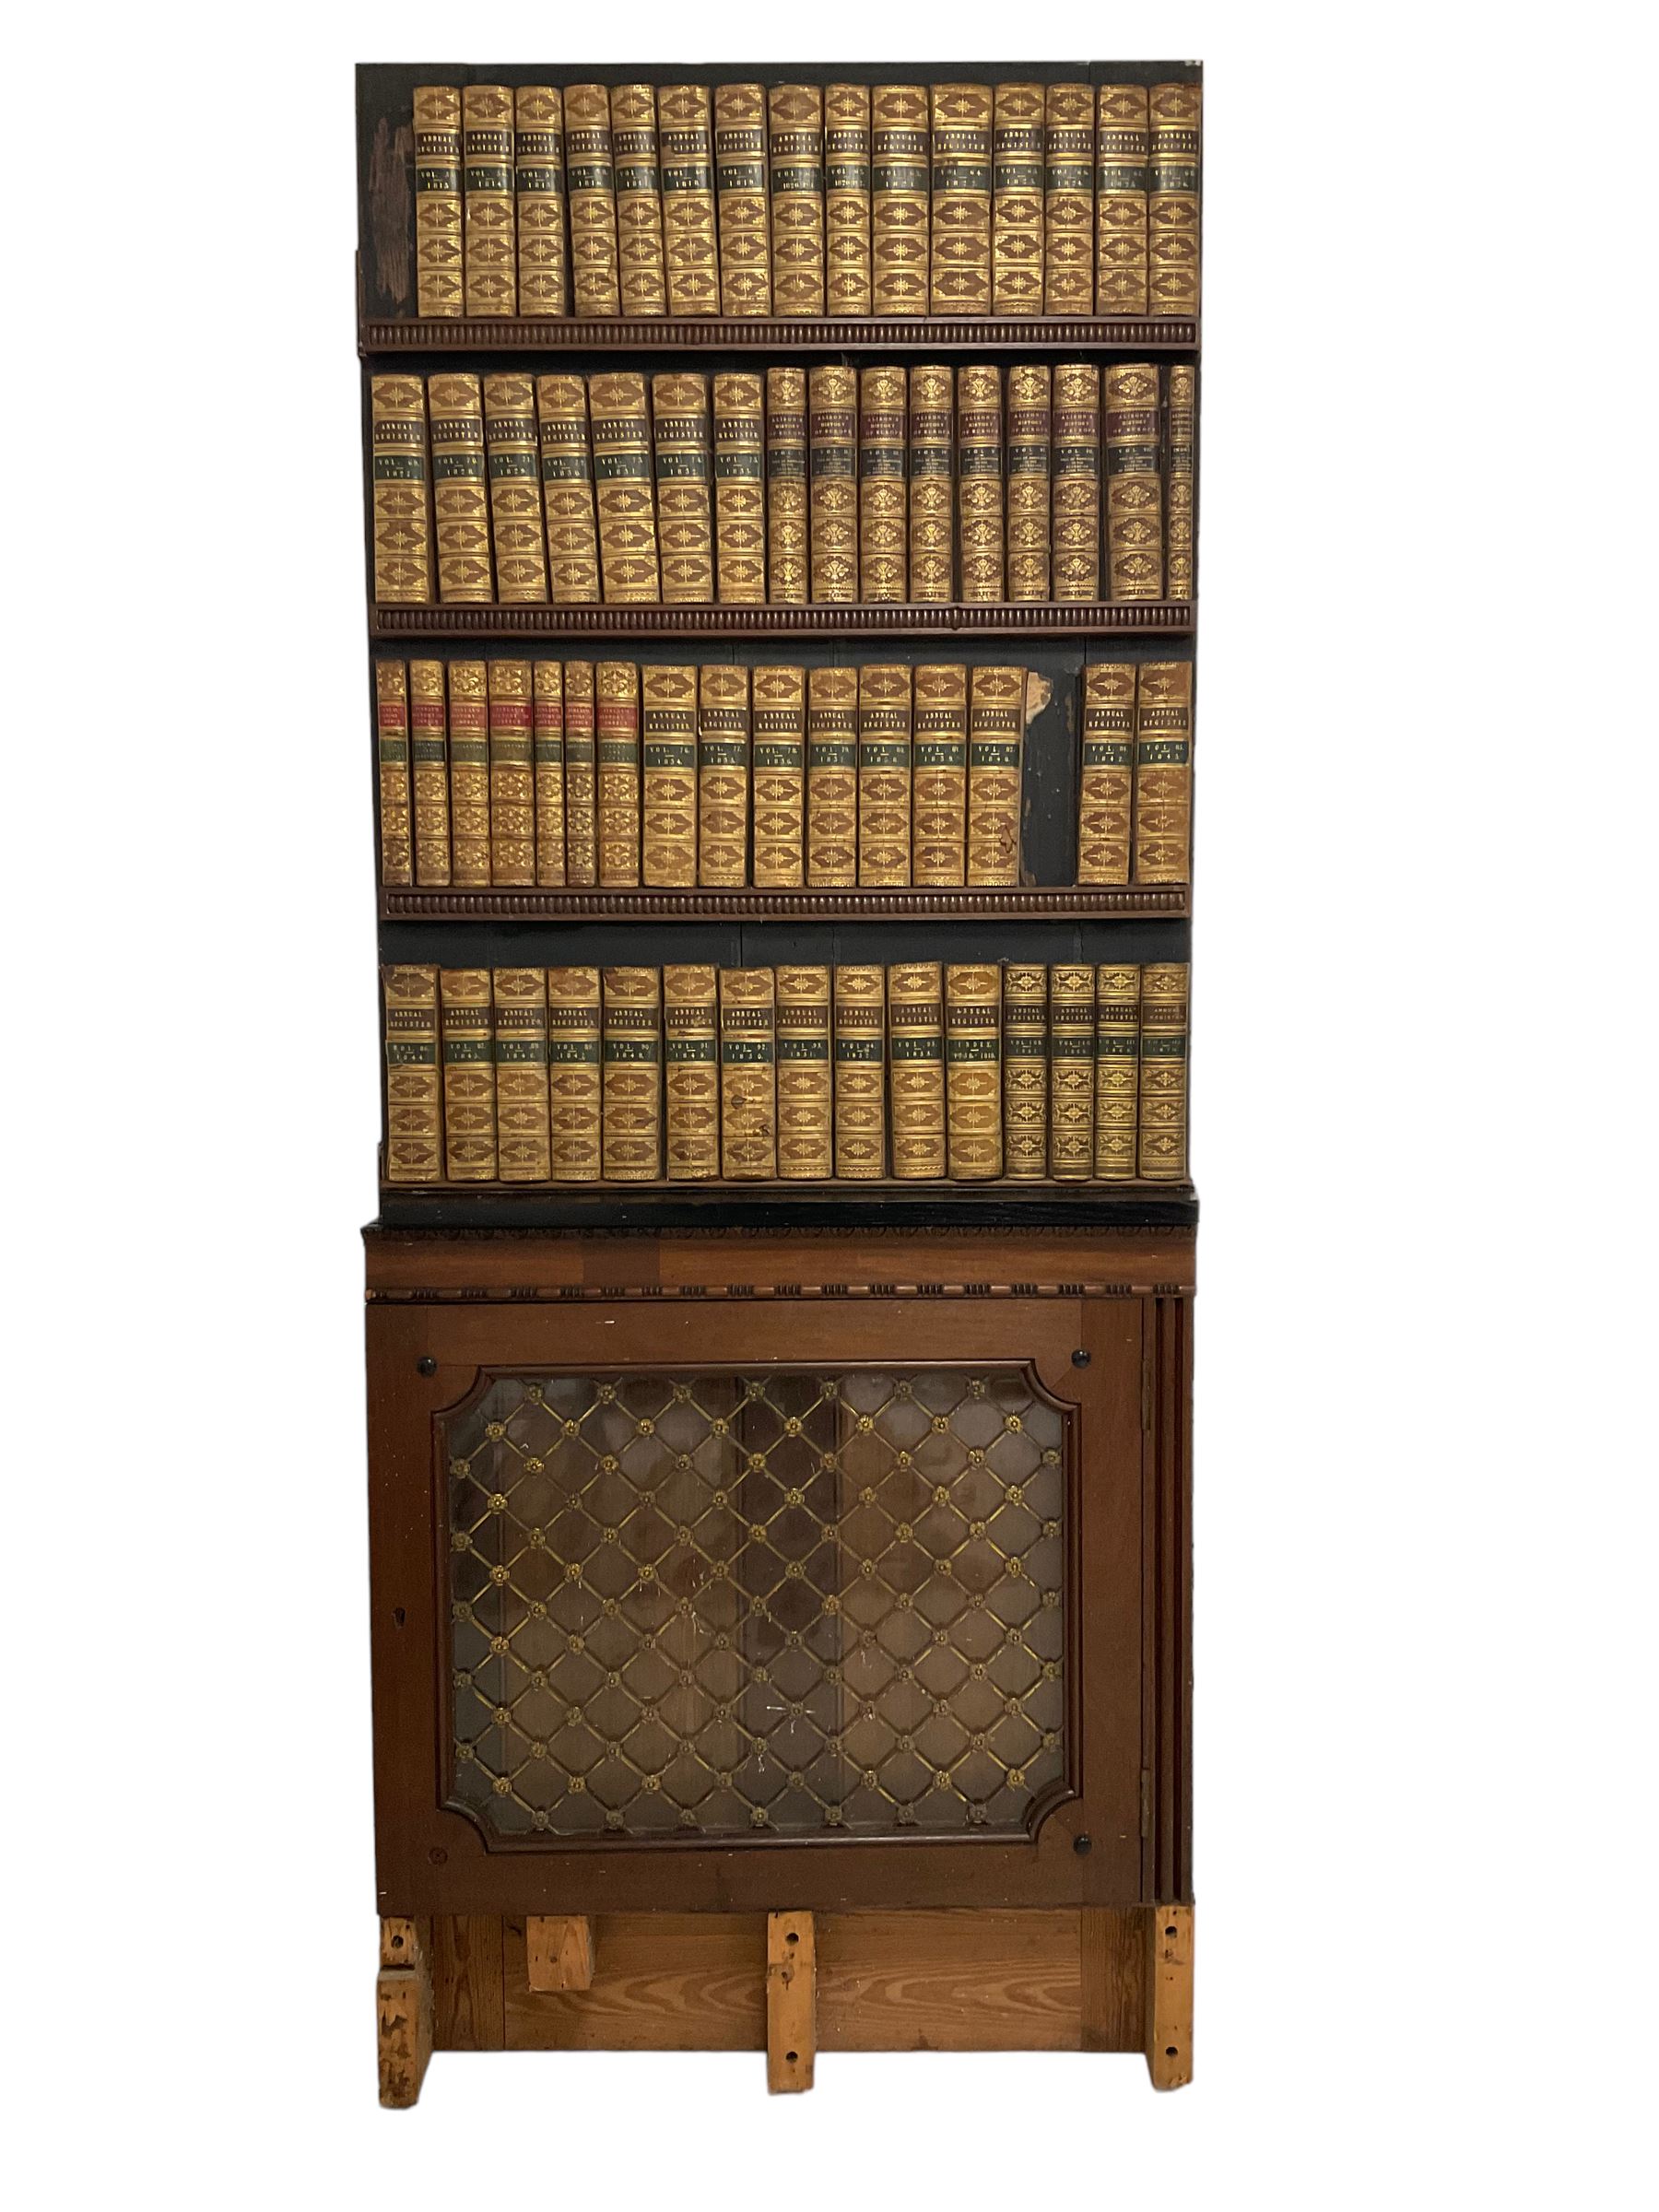 19th century secret door disguised as a bookcase - Image 2 of 14